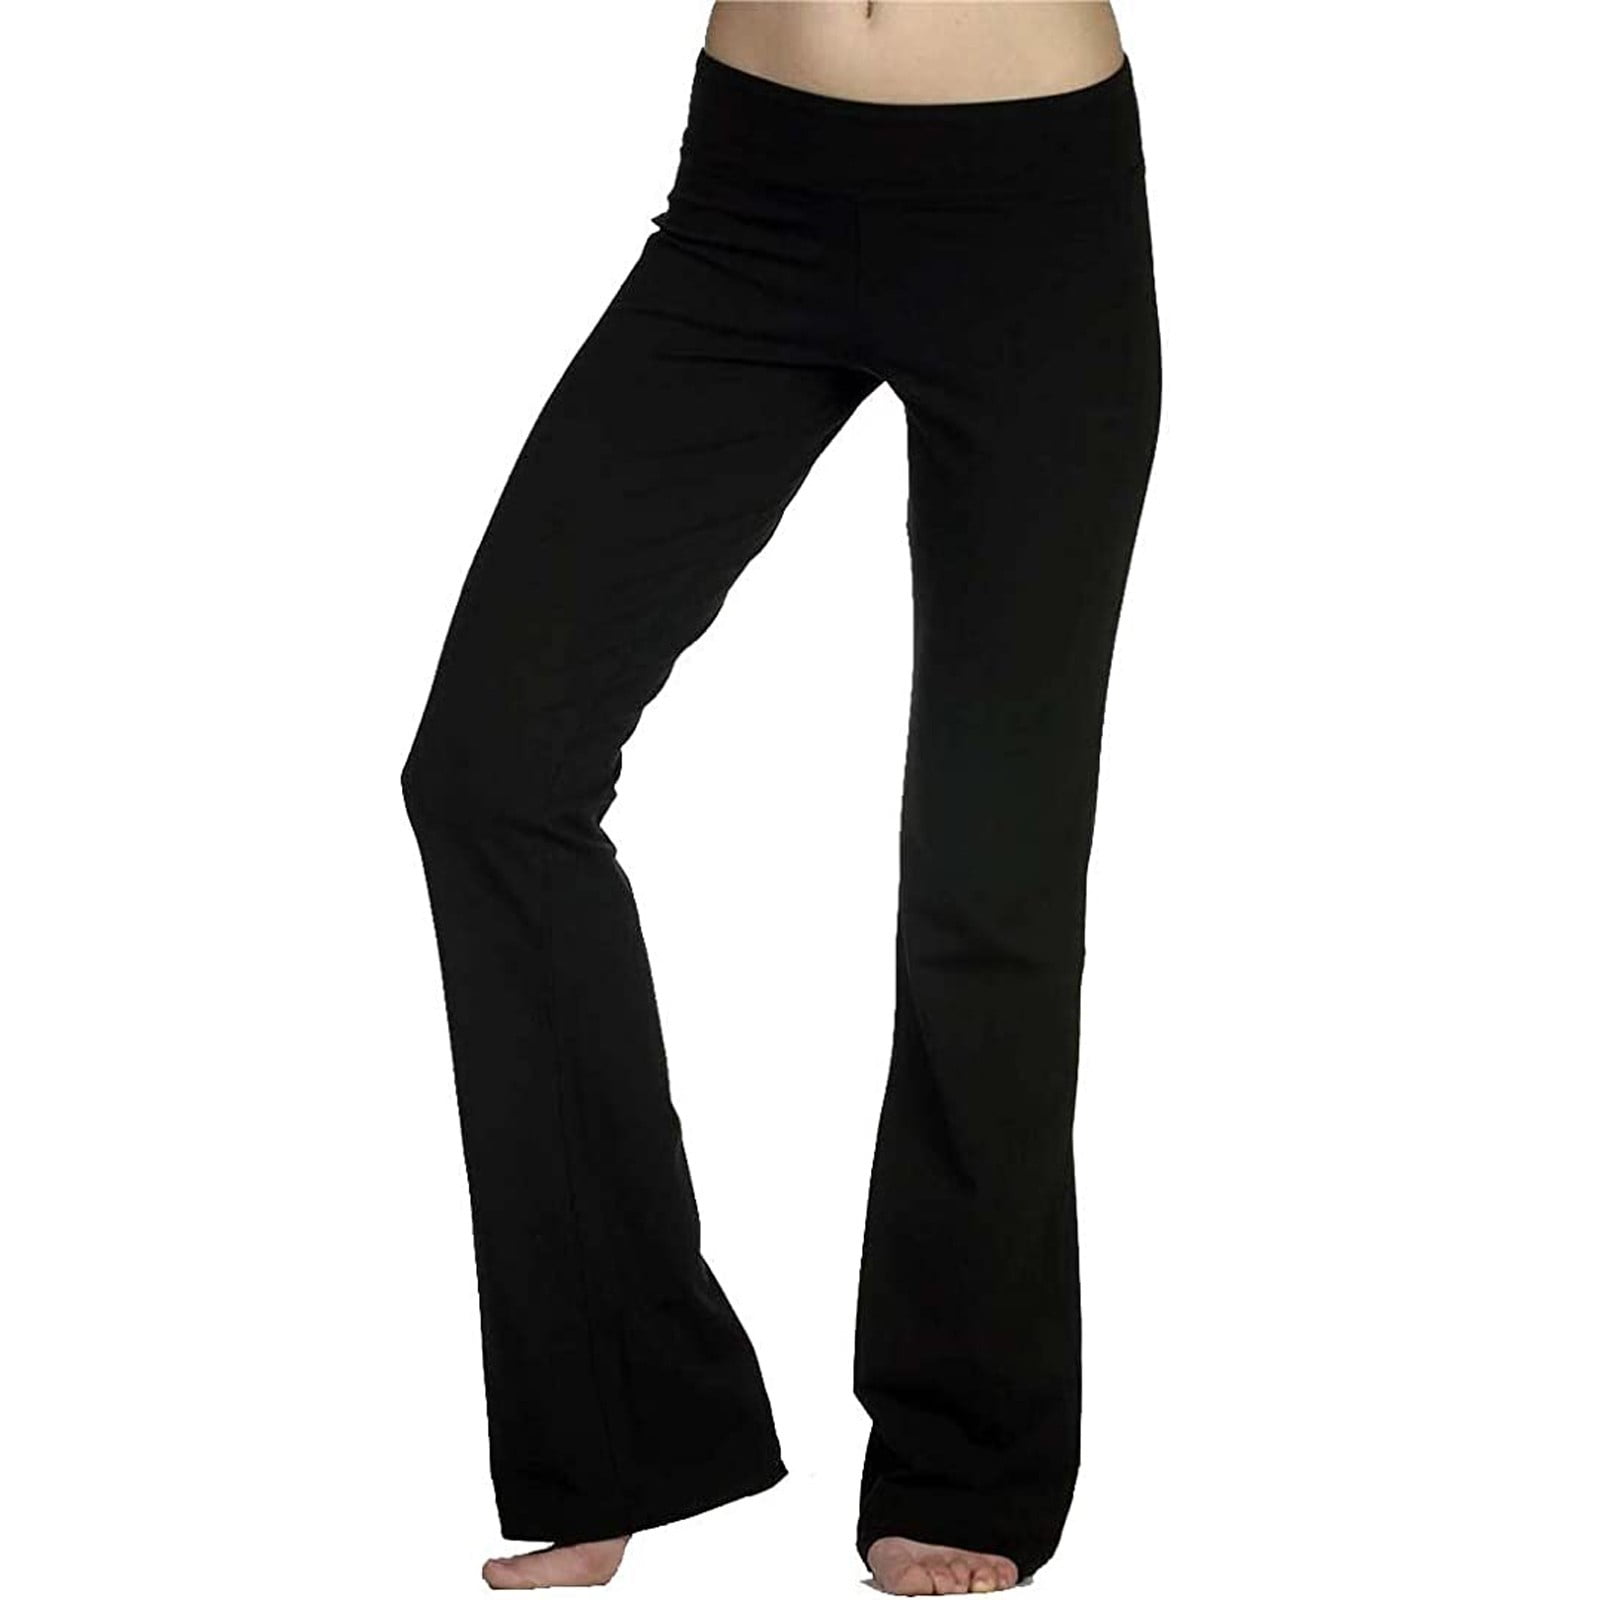 Buy MOREFEEL Women's Black Flare Yoga Pants for Women, High Waisted Buttery  Soft Bootcut Leggings at Amazon.in